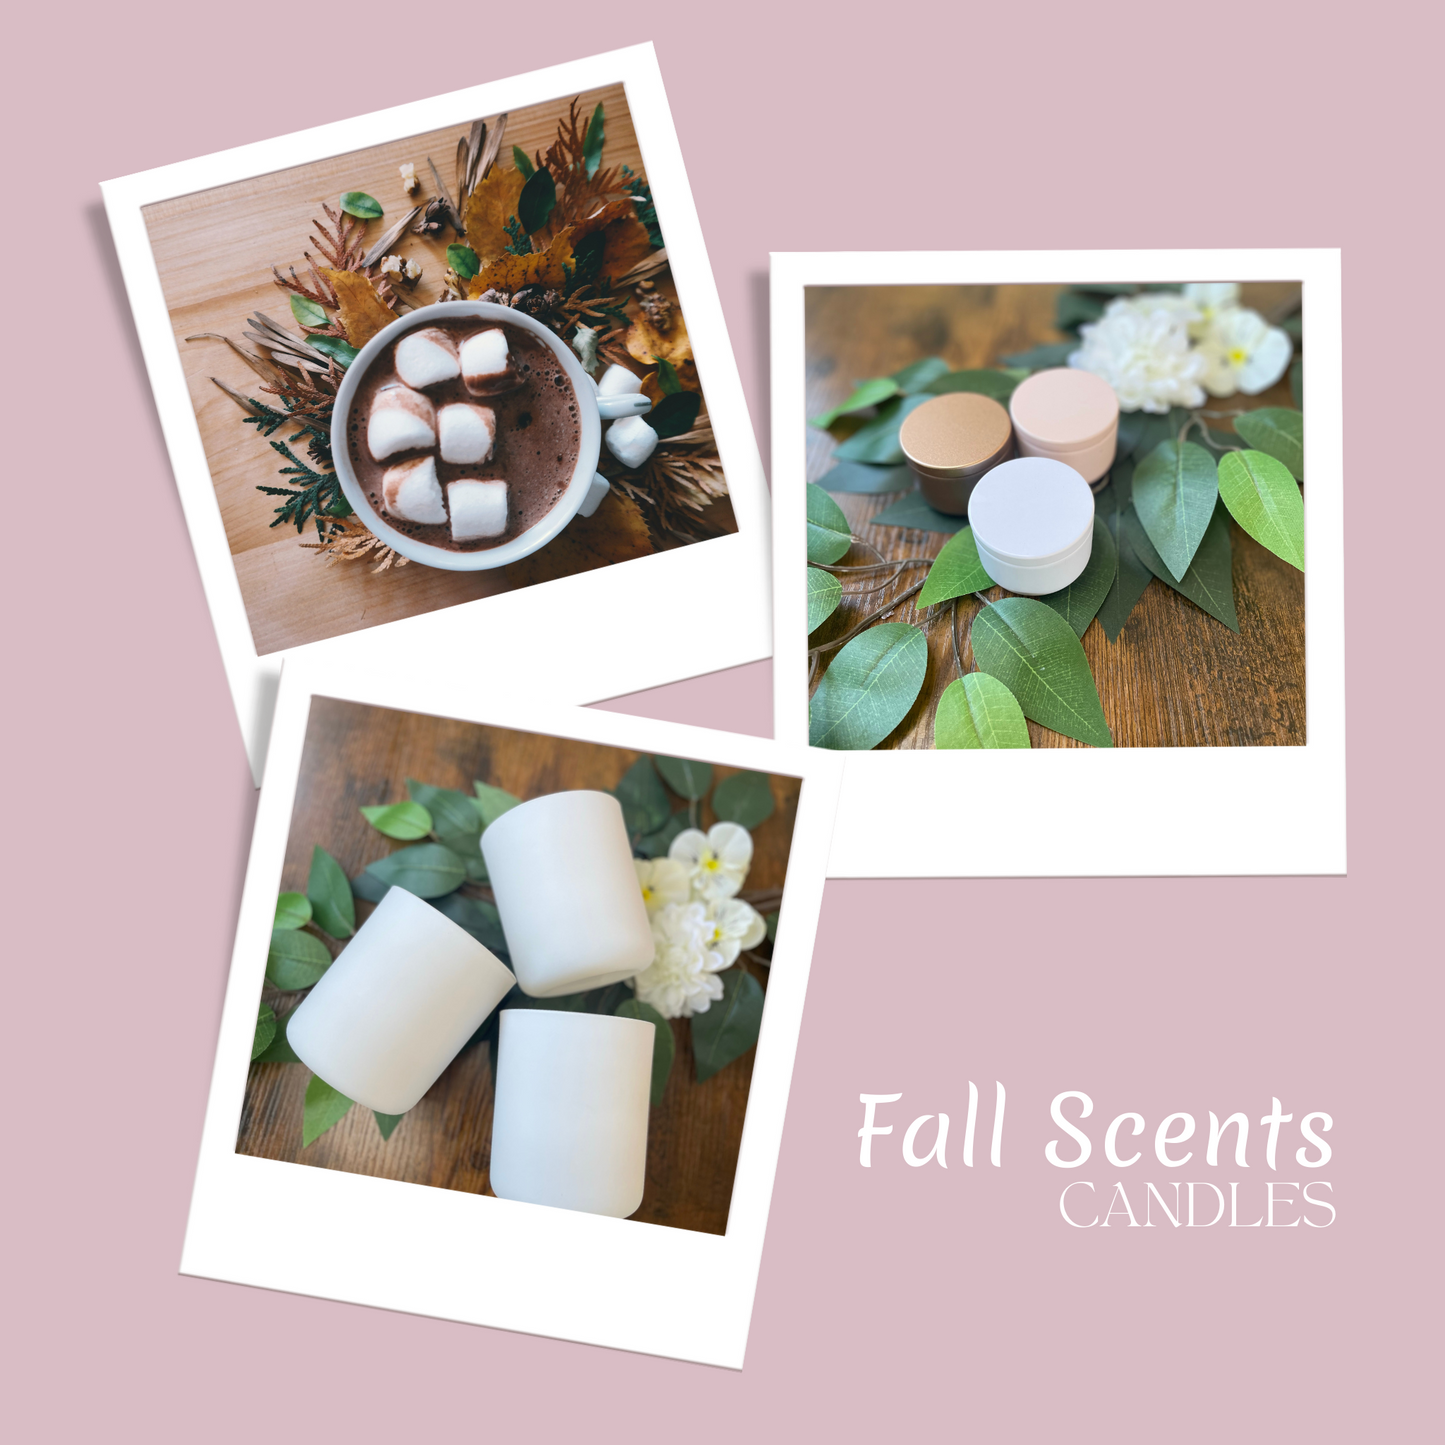 Fall Scents Candles